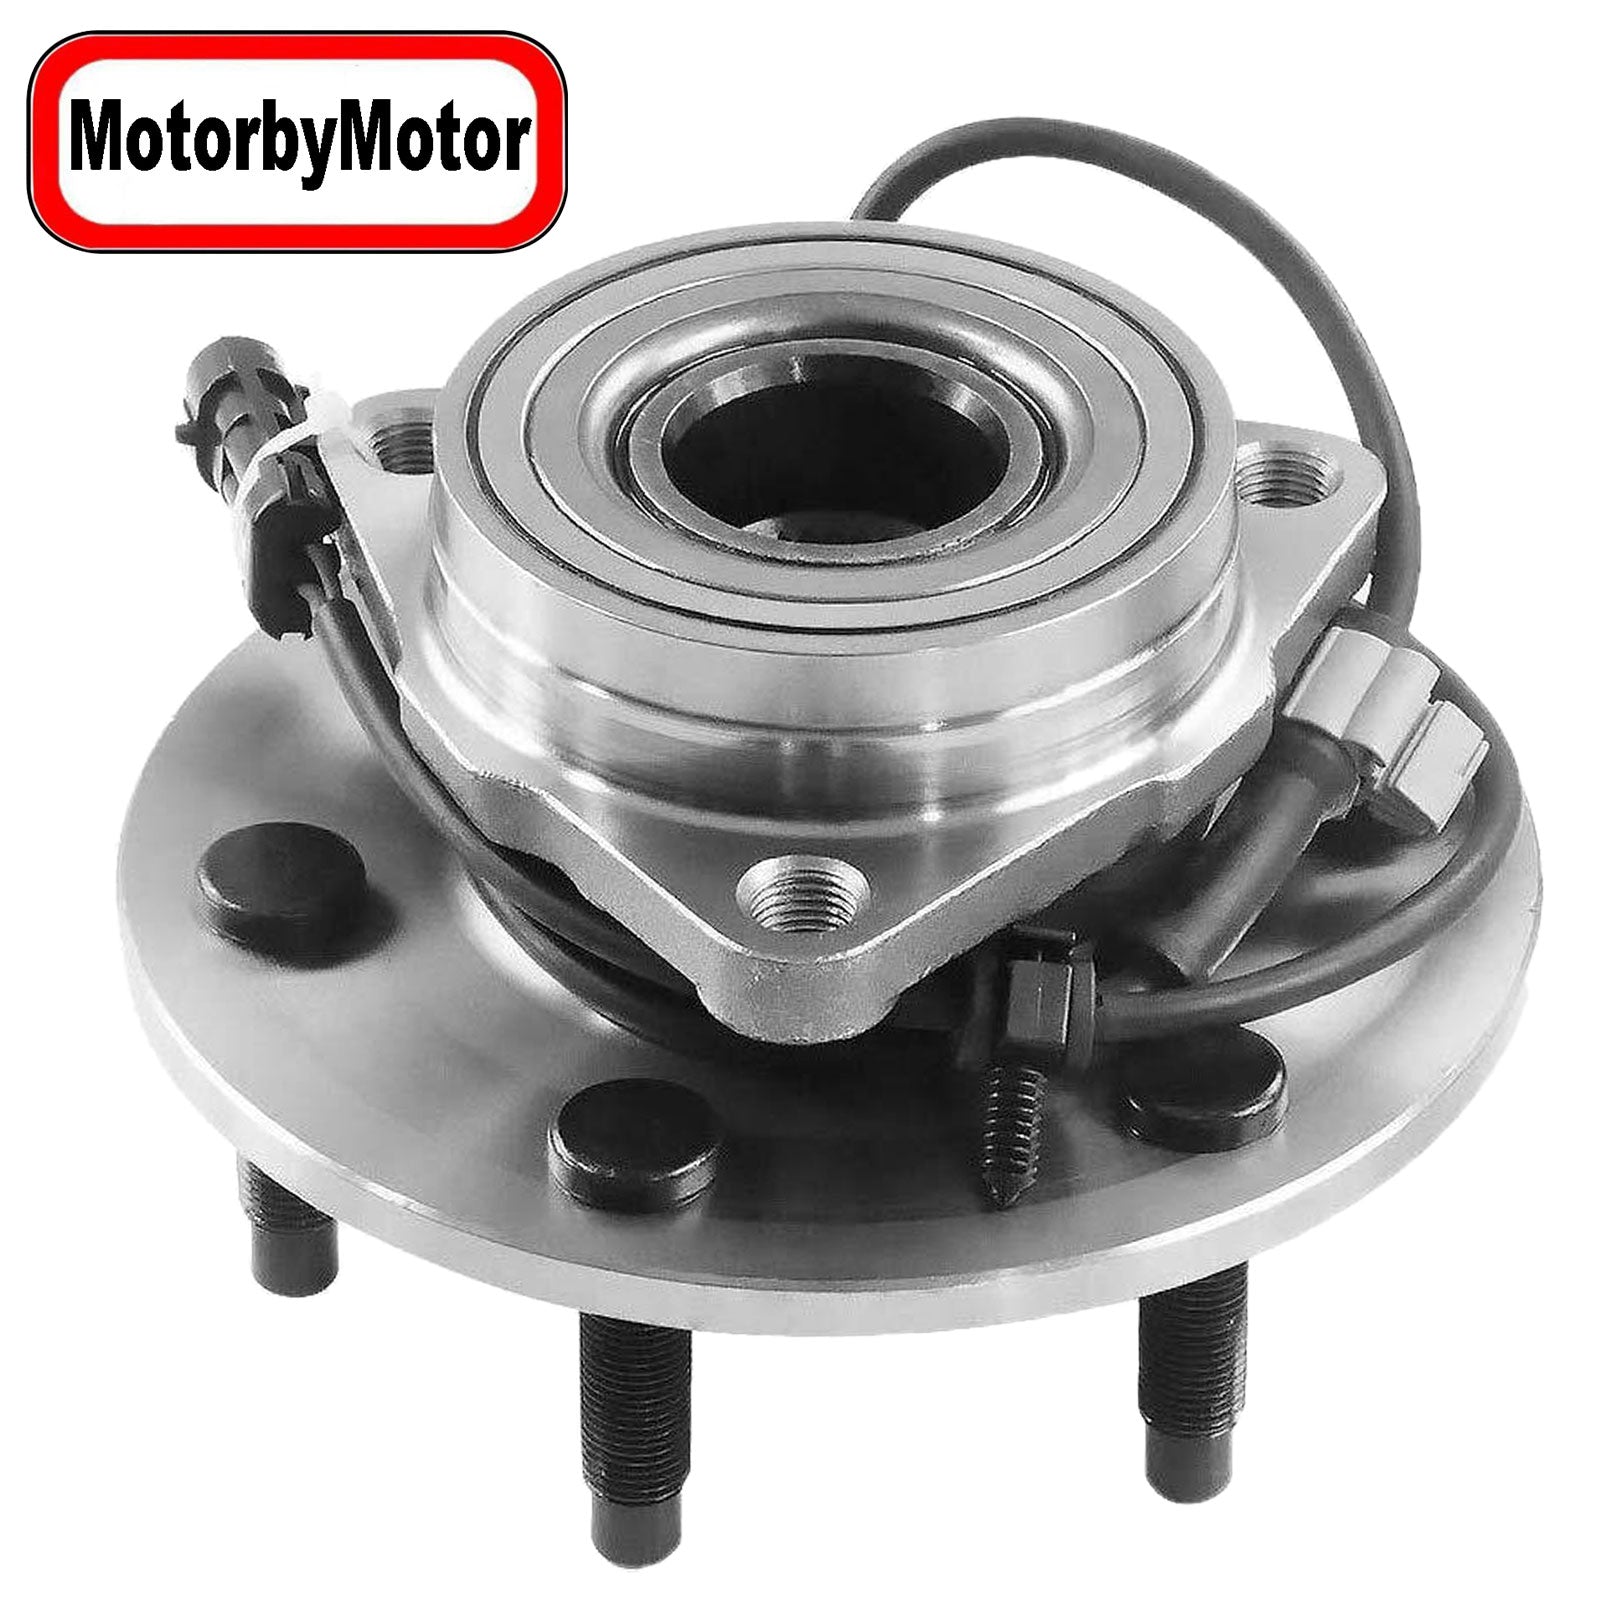 MotorbyMotor 515036 (4WD) Front Wheel Bearing and Hub Assembly with 6 Lugs w/ABS for Chevy Avalanche Express 1500 Silverado Suburban Tahoe, GMC Savana Sierra Yukon, Cadillac Escalade ESV EXT MotorbyMotor